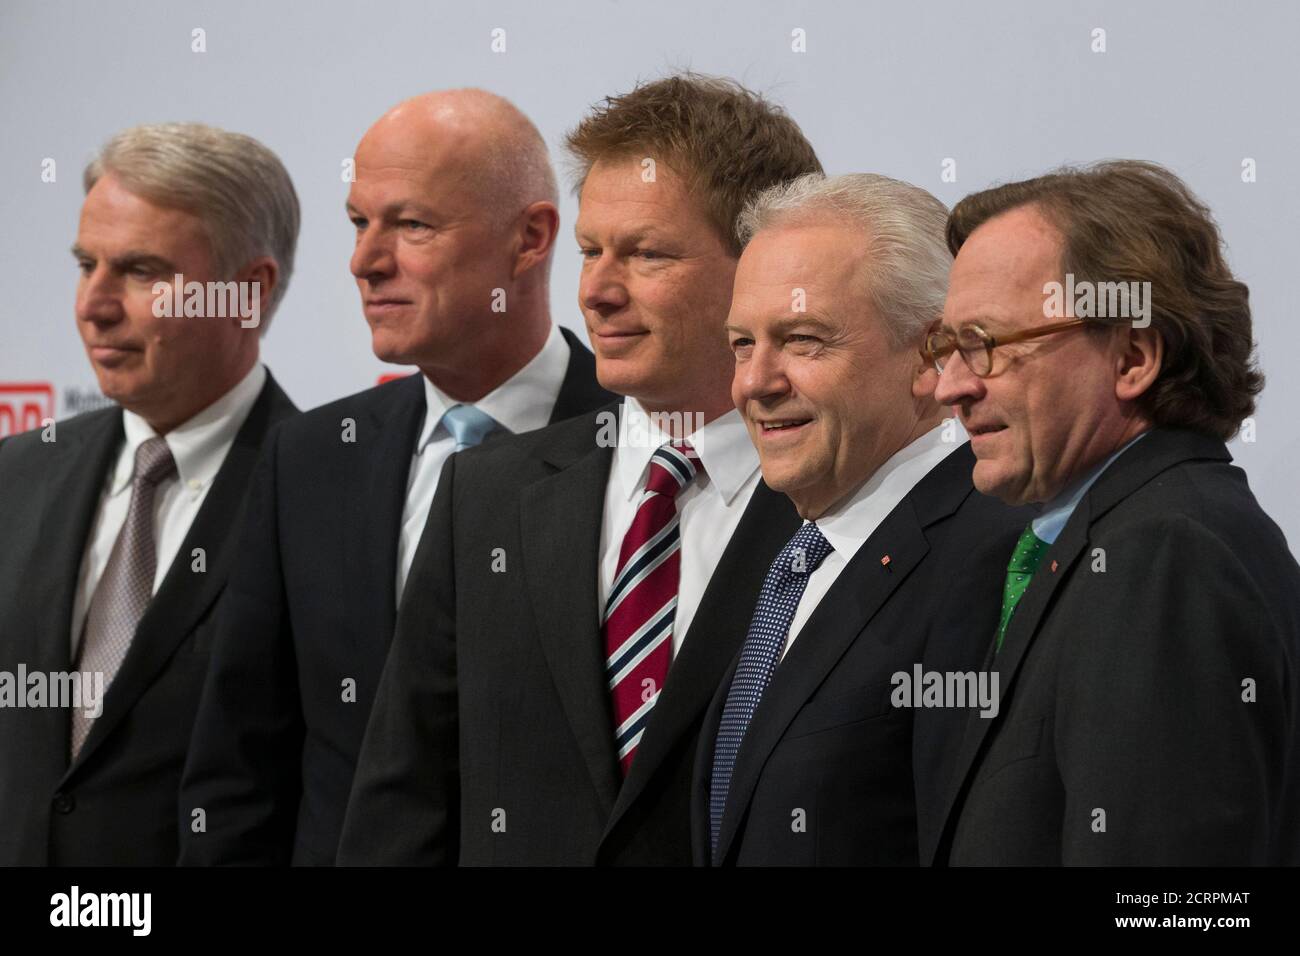 Chief Executive Officer of the German railway firm Deutsche Bahn Ruediger Grube (2nd R) poses with members of the board before an annual results news conference in Berlin March 21, 2013. Pictured are (R-L) Chief of human resources Ulrich Weber, chief of finance and controlling Richard Lutz, chief of passenger traffic Ulrich Homburg and chief of compliance and security Gerd Becht.   REUTERS/Thomas Peter (GERMANY  - Tags: BUSINESS TRANSPORT) Stock Photo